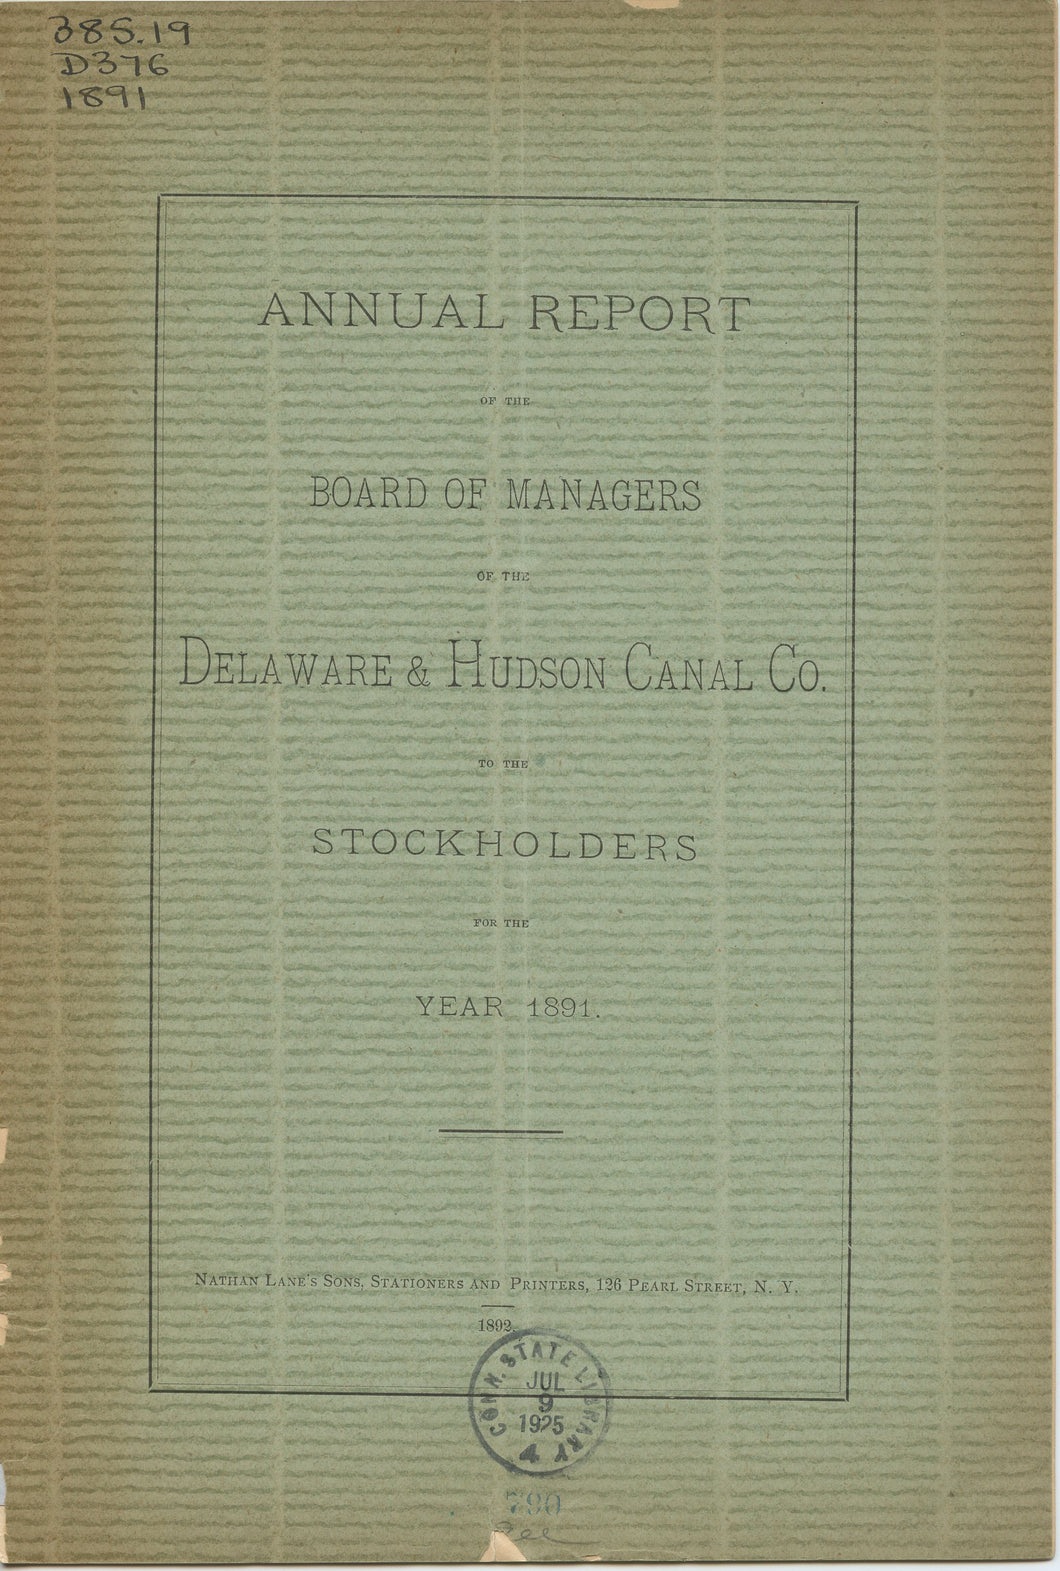 Annual Report of the Board of Managers of the Delaware & Hudson Canal Co. to the Stockholders, for the Year 1891